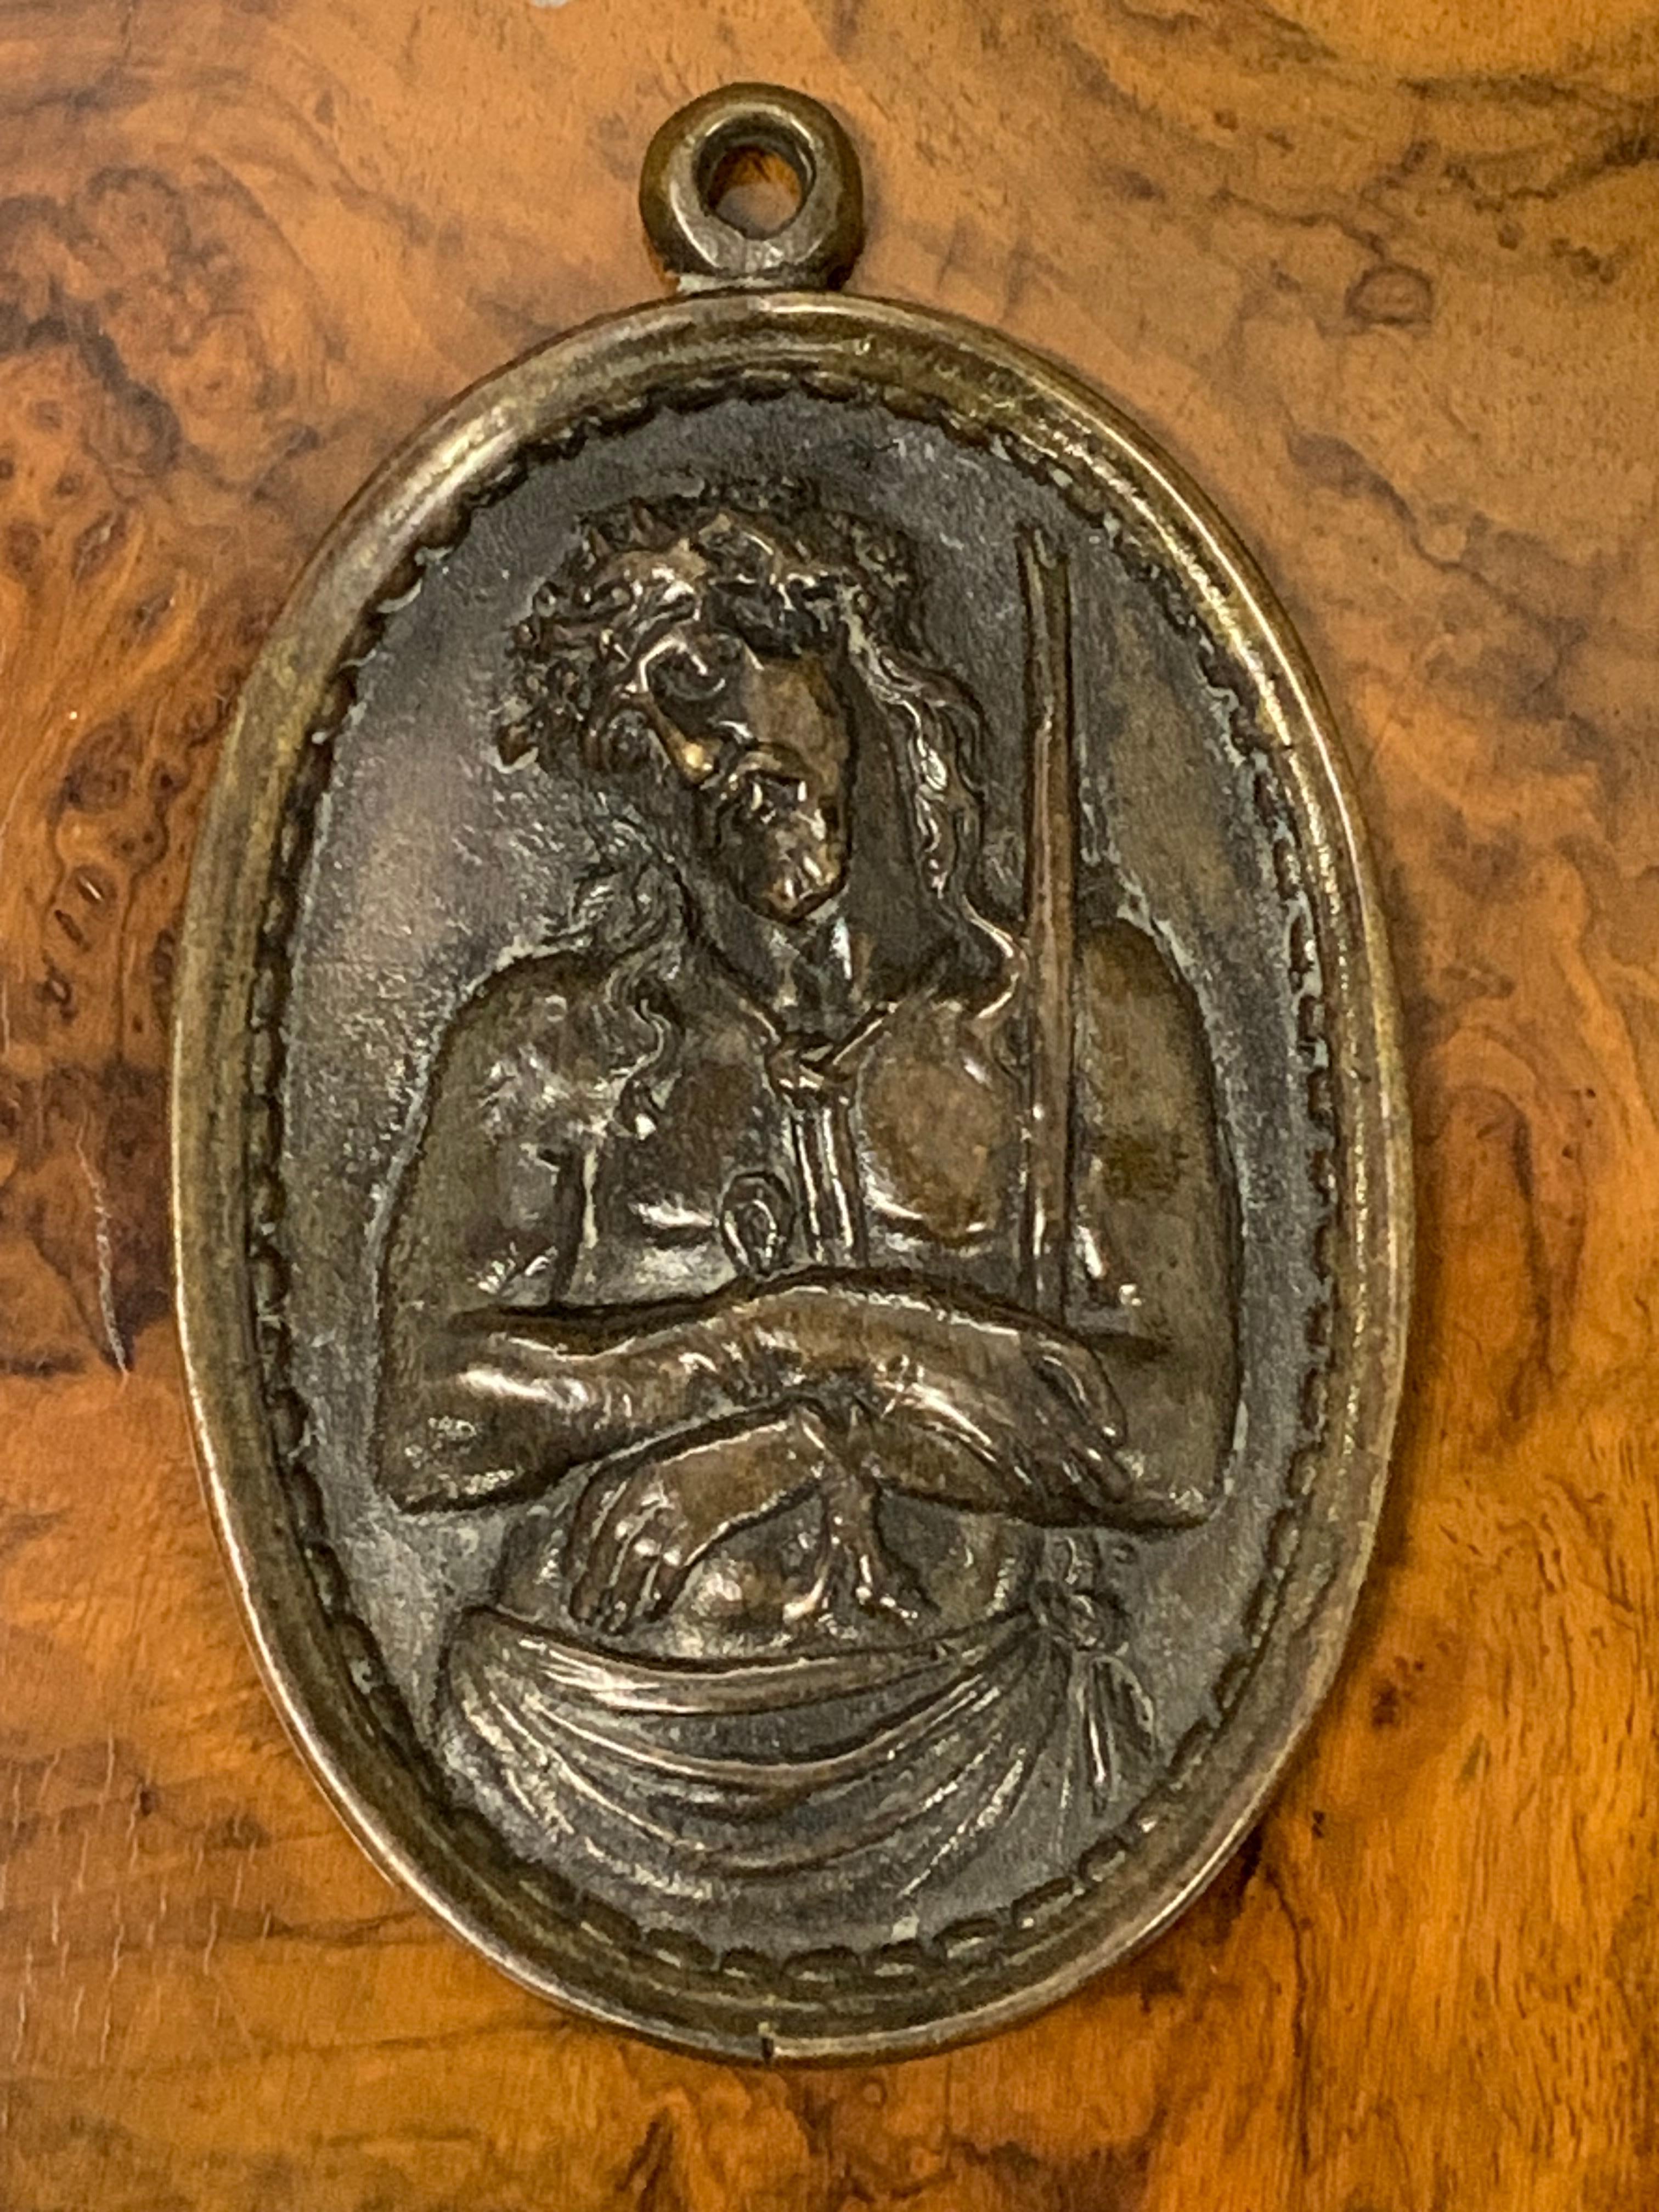 Devotional plaque, Ecce Homo. Bronze. Spanish school, 17th century. 
Bronze devotional plate with an oval shape and a washer at the top that presents a relief within a frame of smooth moldings with a chain of pearls inside. A three-quarter Ecce Homo